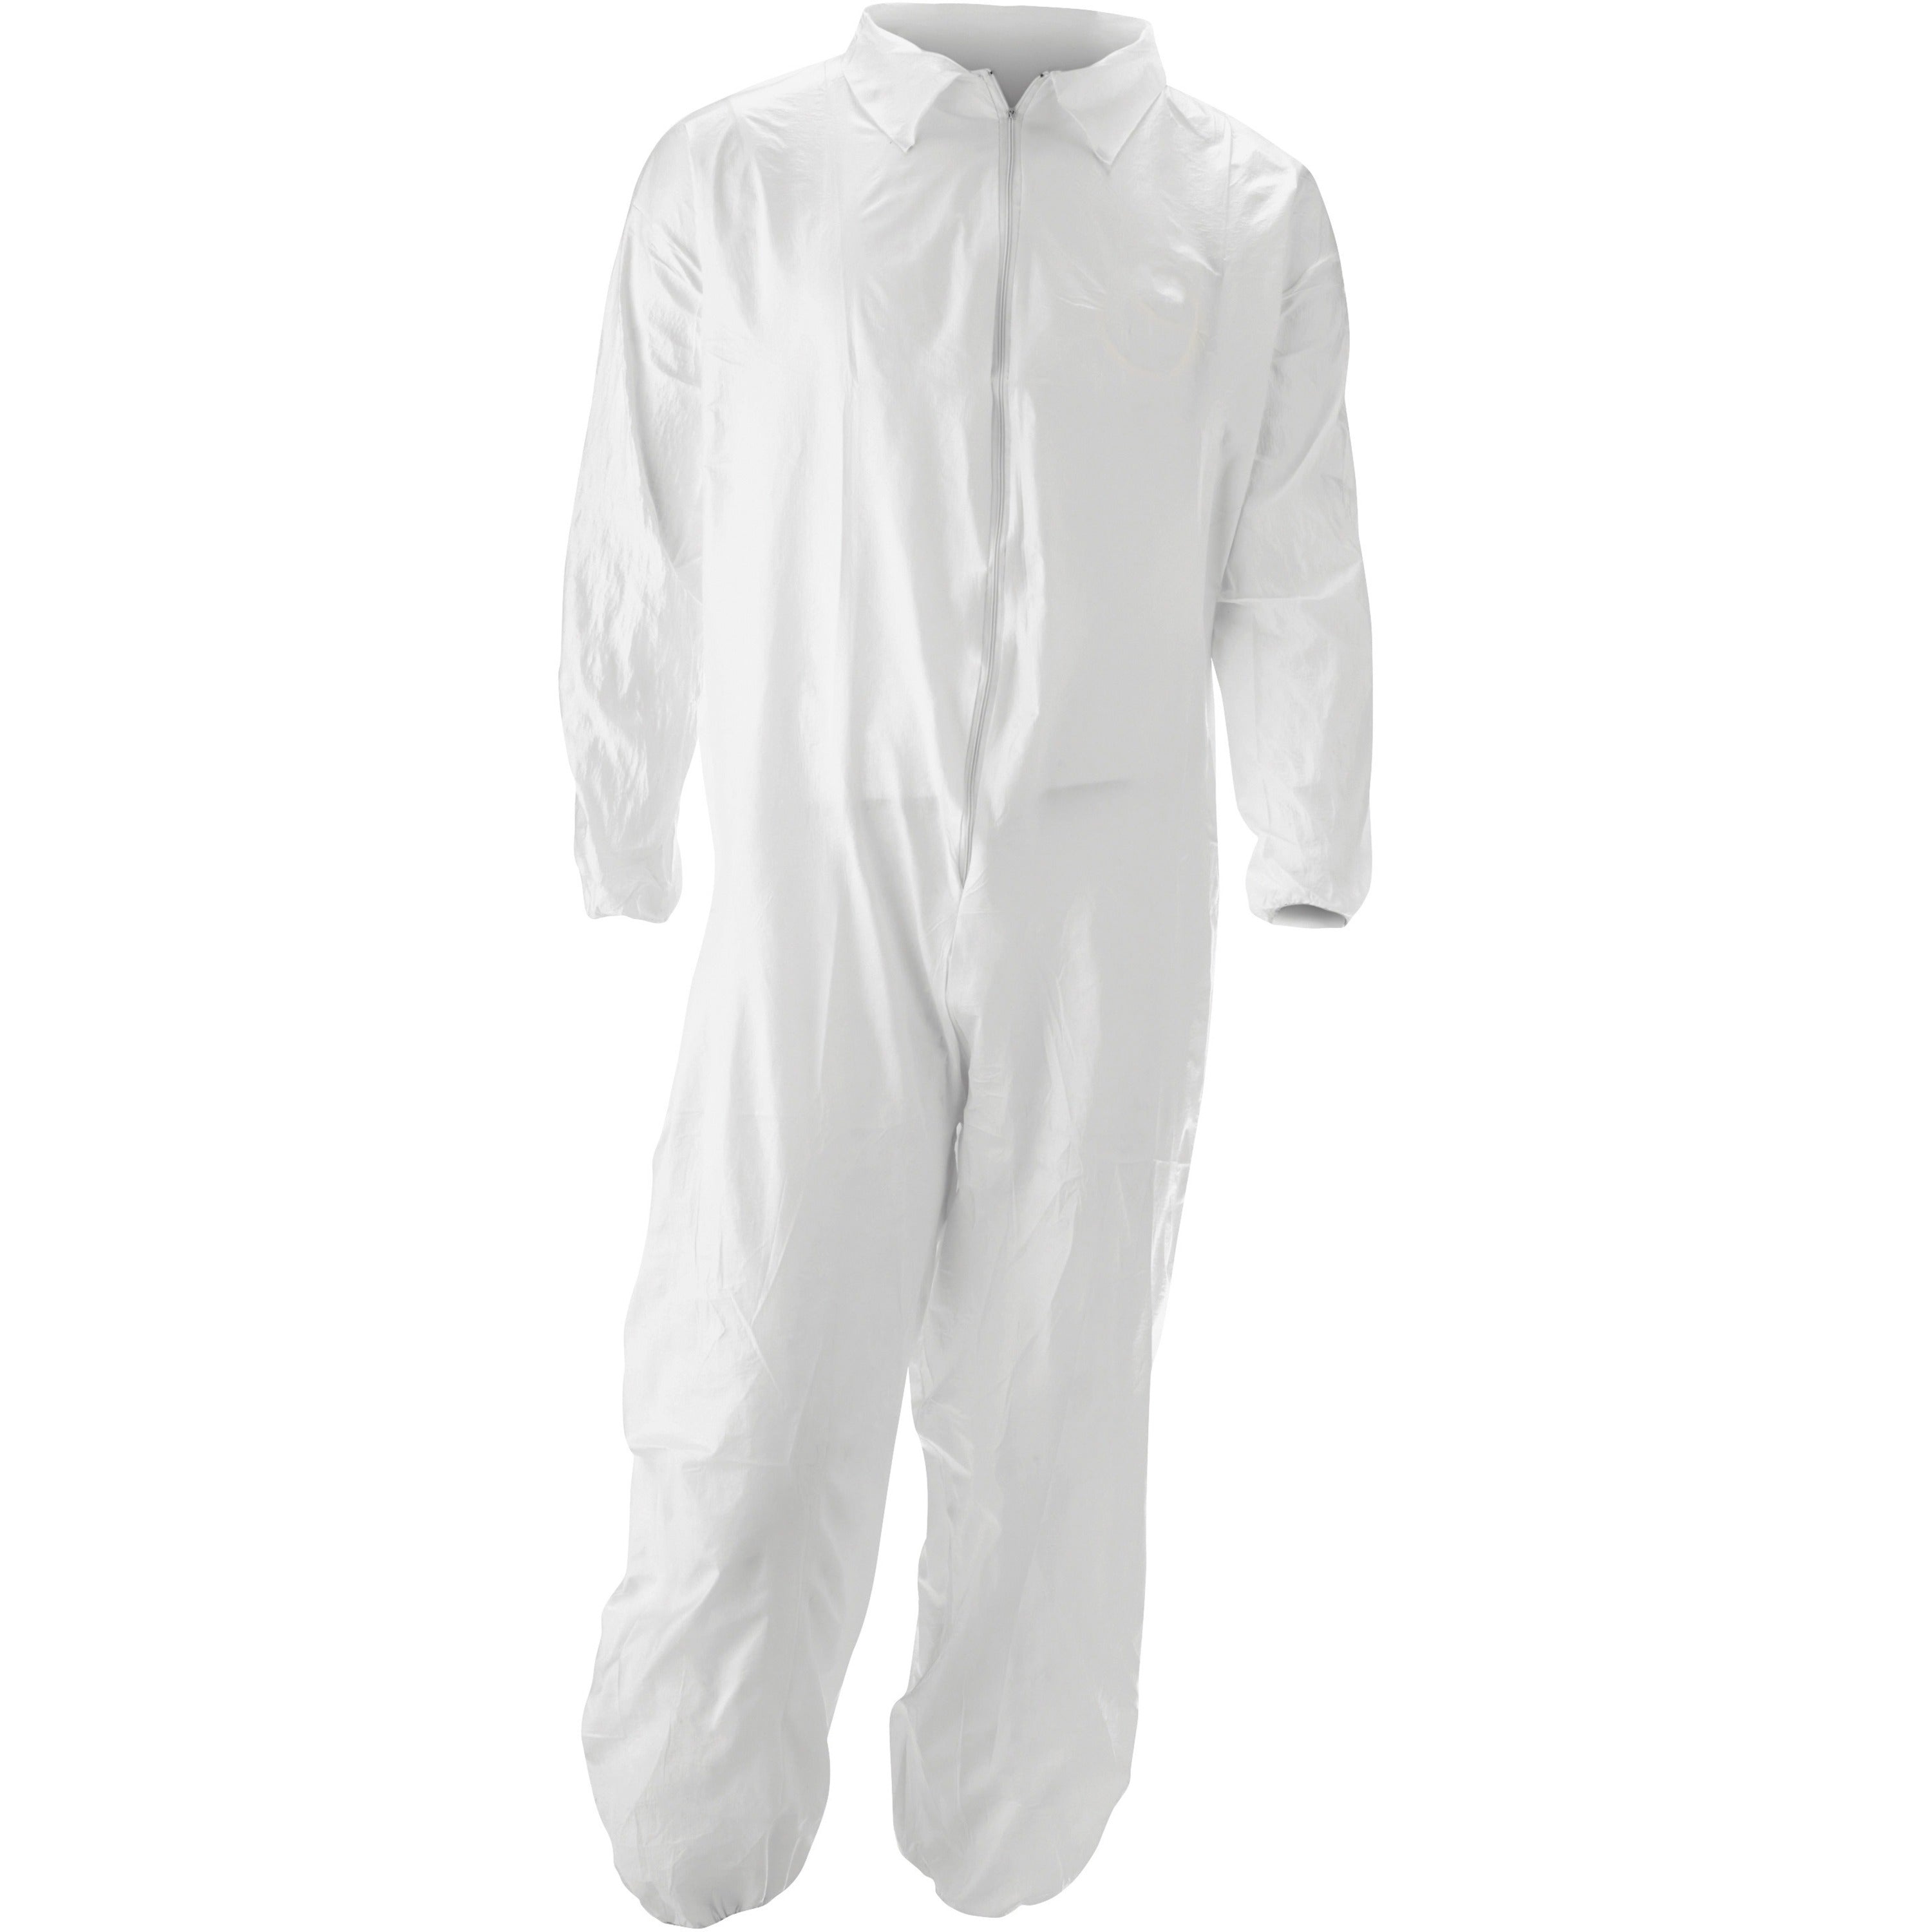 malt-promax-coverall-recommended-for-chemical-painting-food-processing-pesticide-spraying-asbestos-abatement-extra-large-size-zipper-closure-polyolefin-white-25-carton_impm1017xl - 1